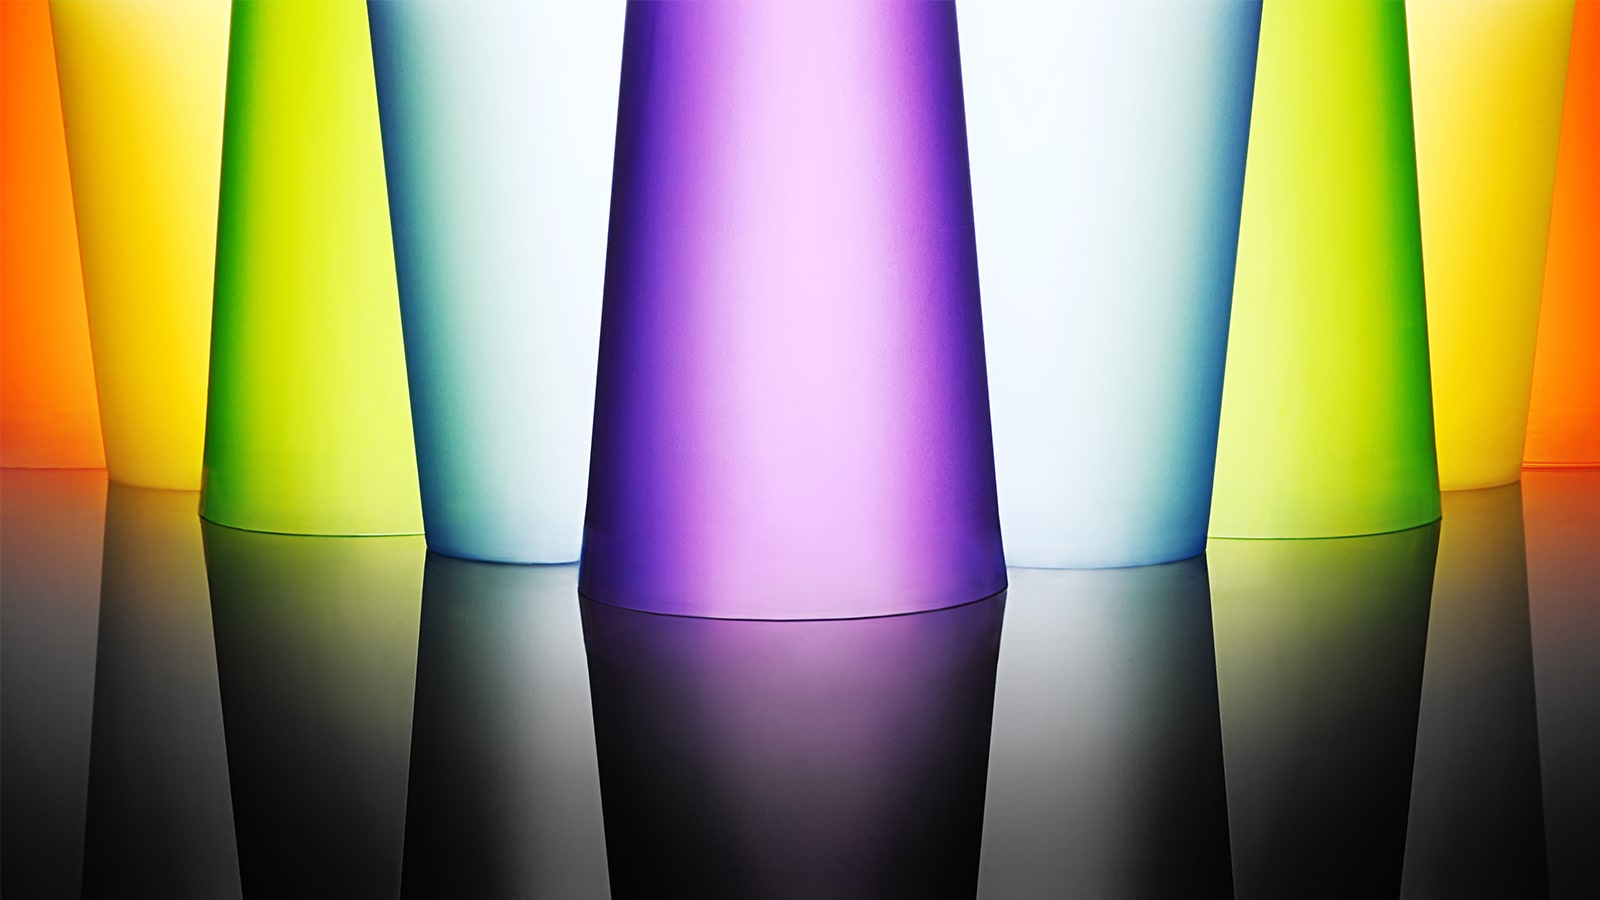 An image that bright and colorful glass cups.